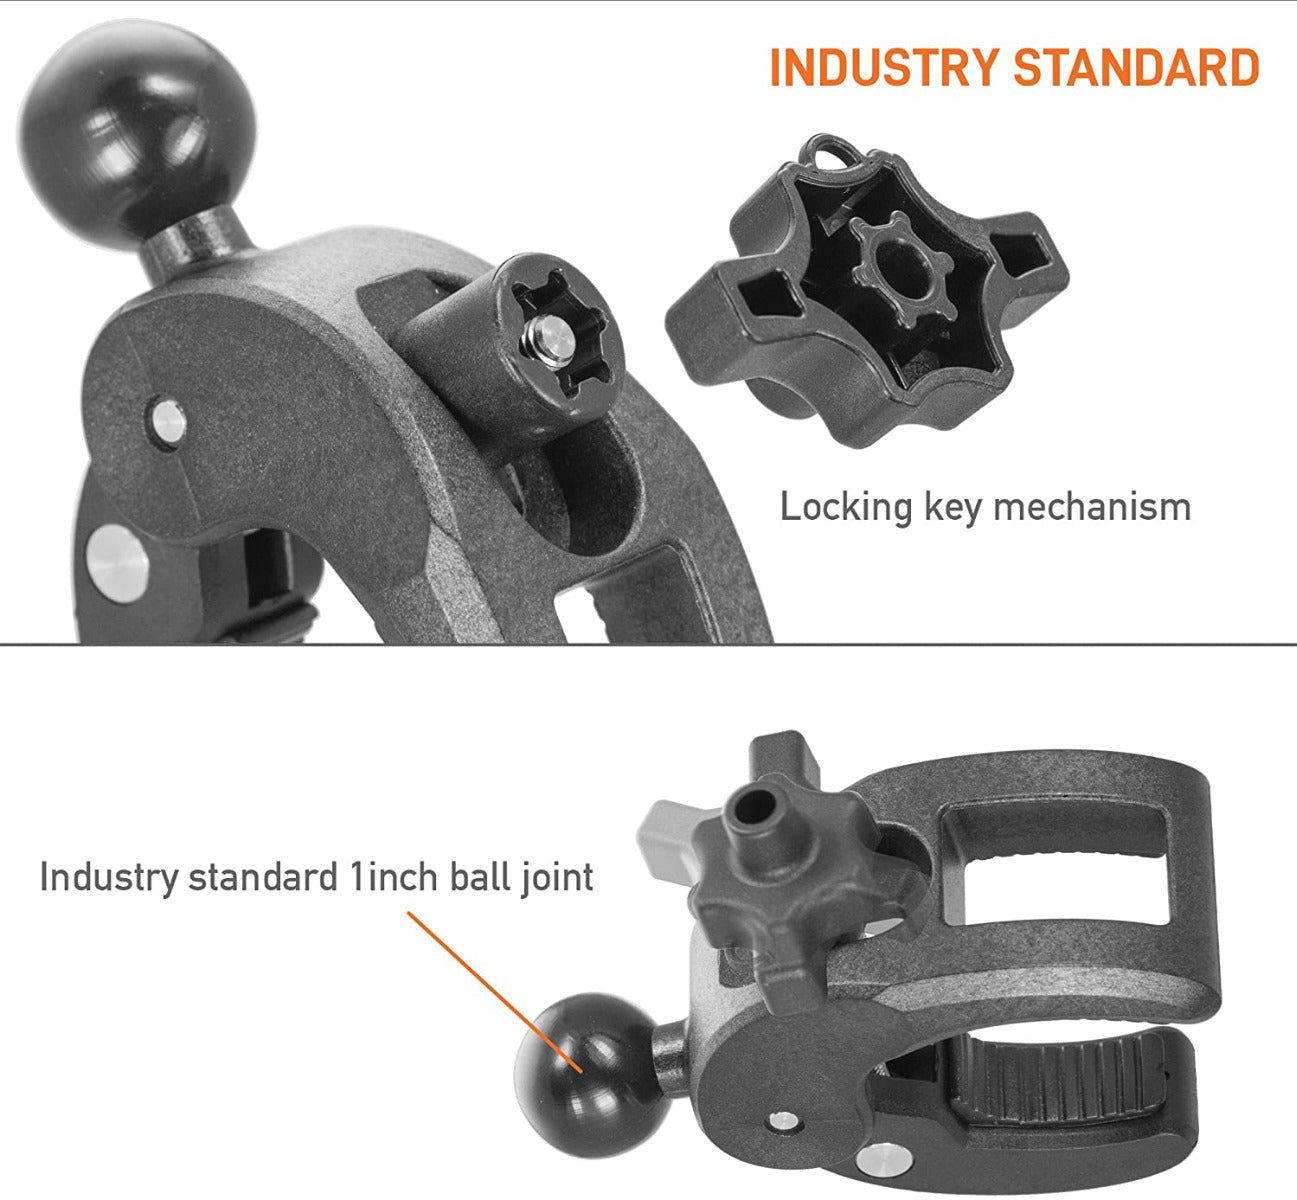 iBOLT 17mm Dual Ball Clamping Mount for Handlebars, Poles, Posts for Garmin GPS Systems and iBOLT Phone Holders